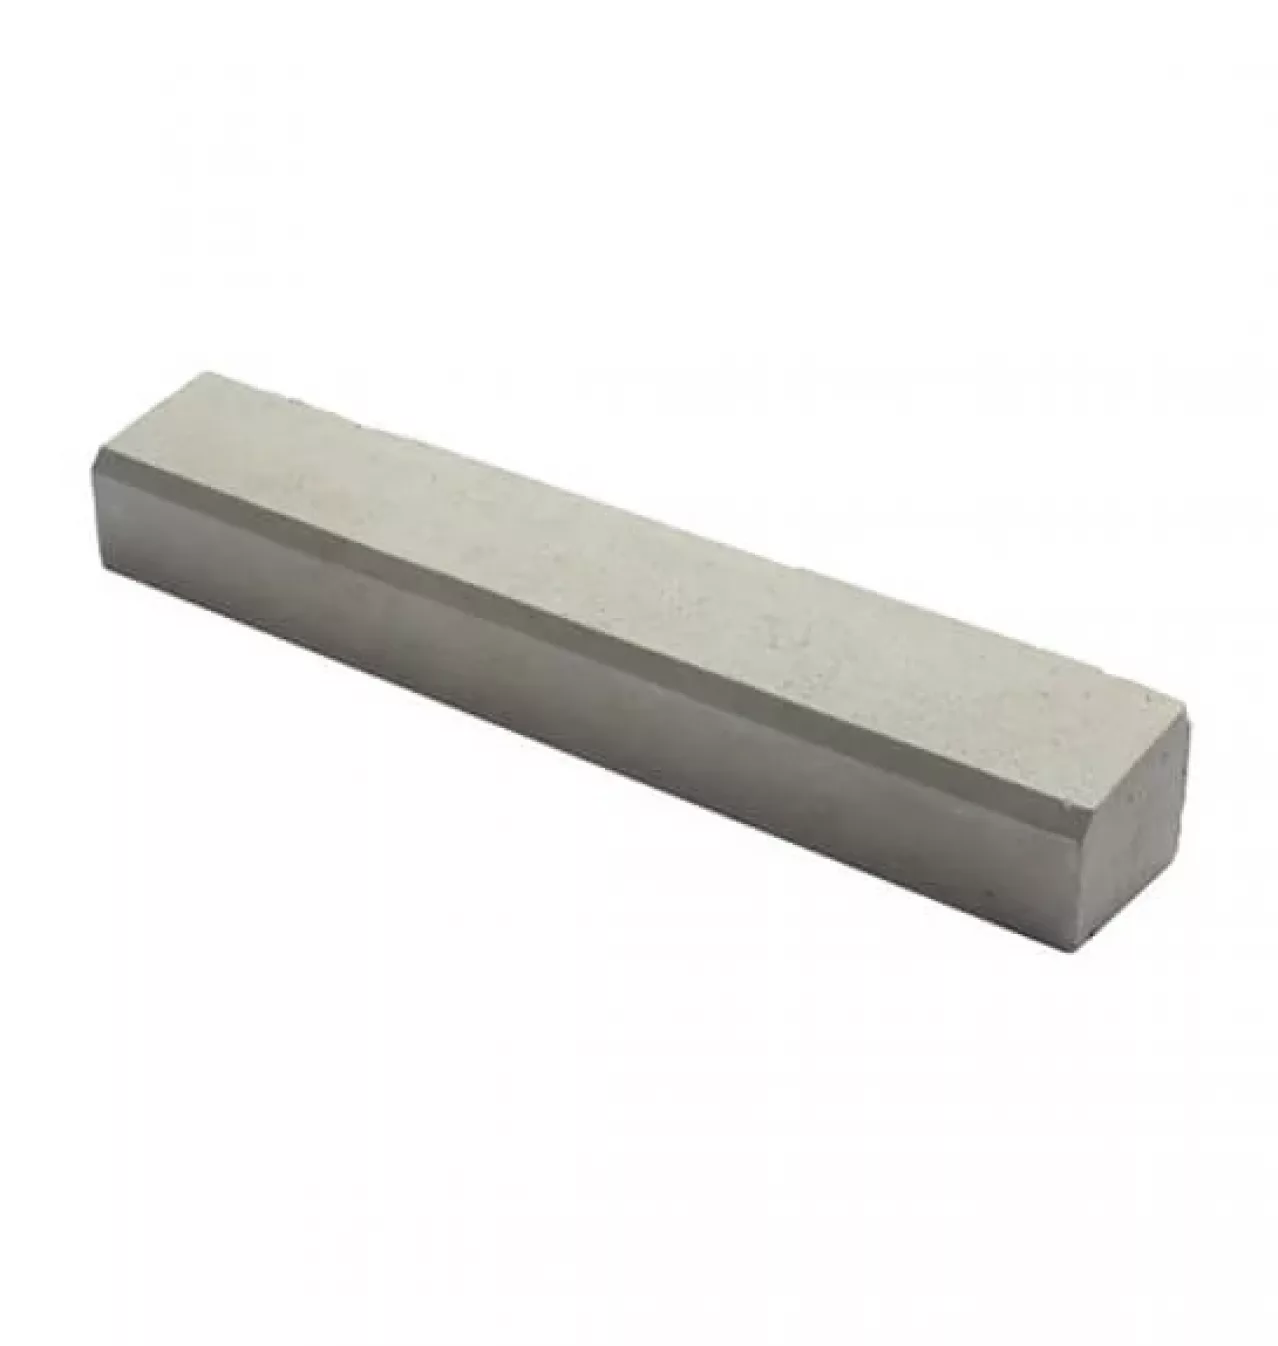 Cast Fit Watertable Sill IV